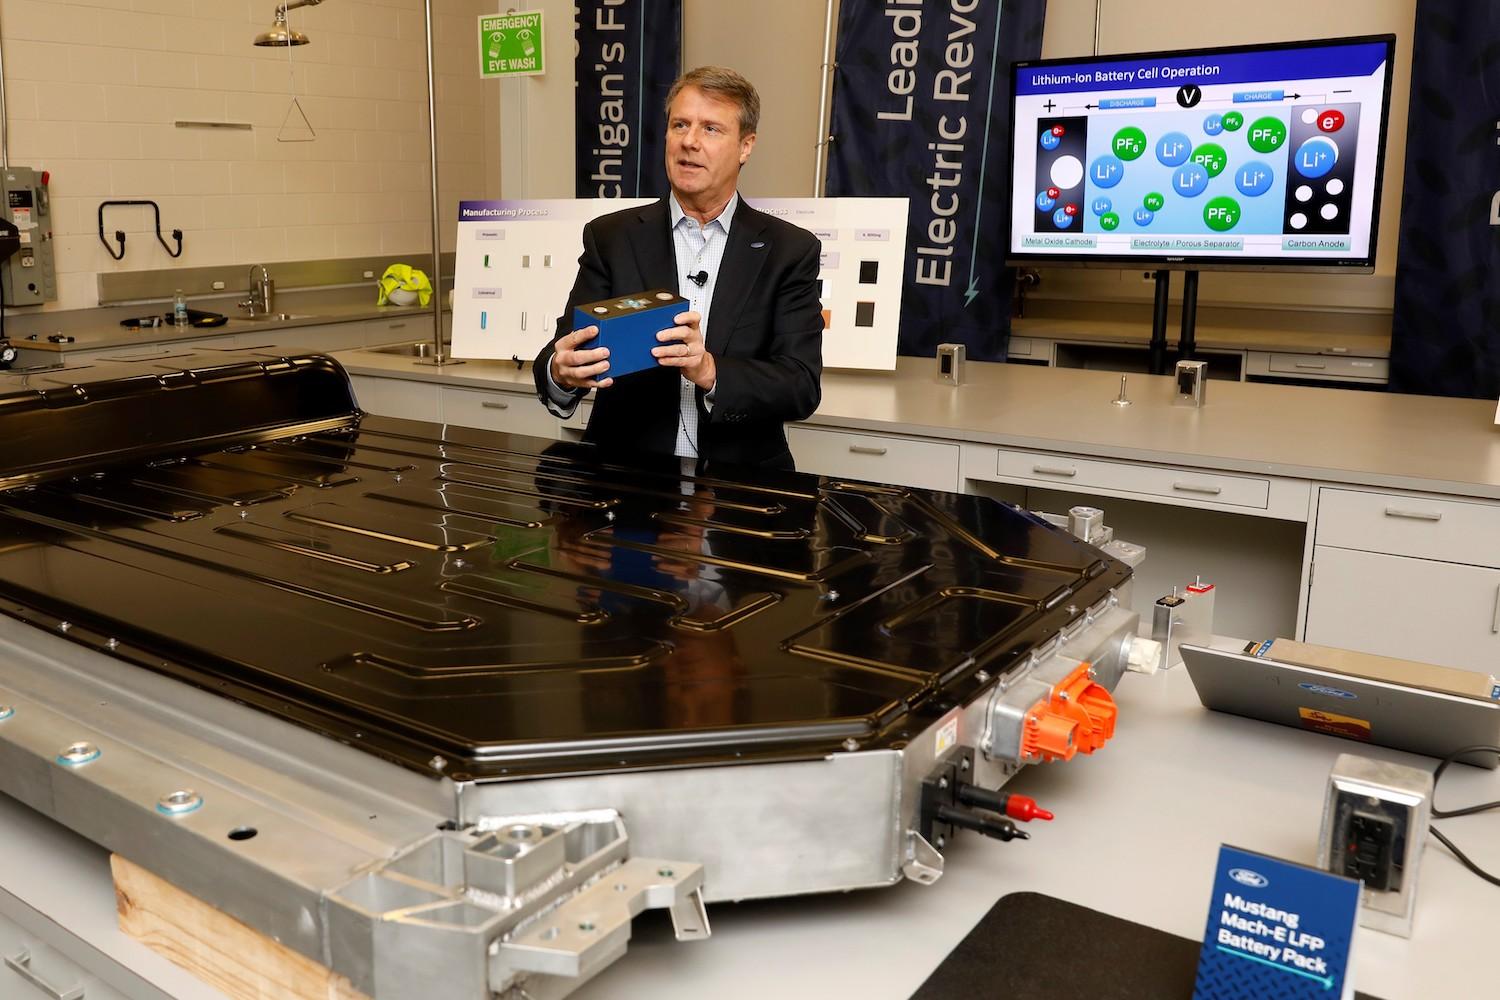 Ford scientist with EV battery - lithium iron phosphate batteries - sustainability solutions